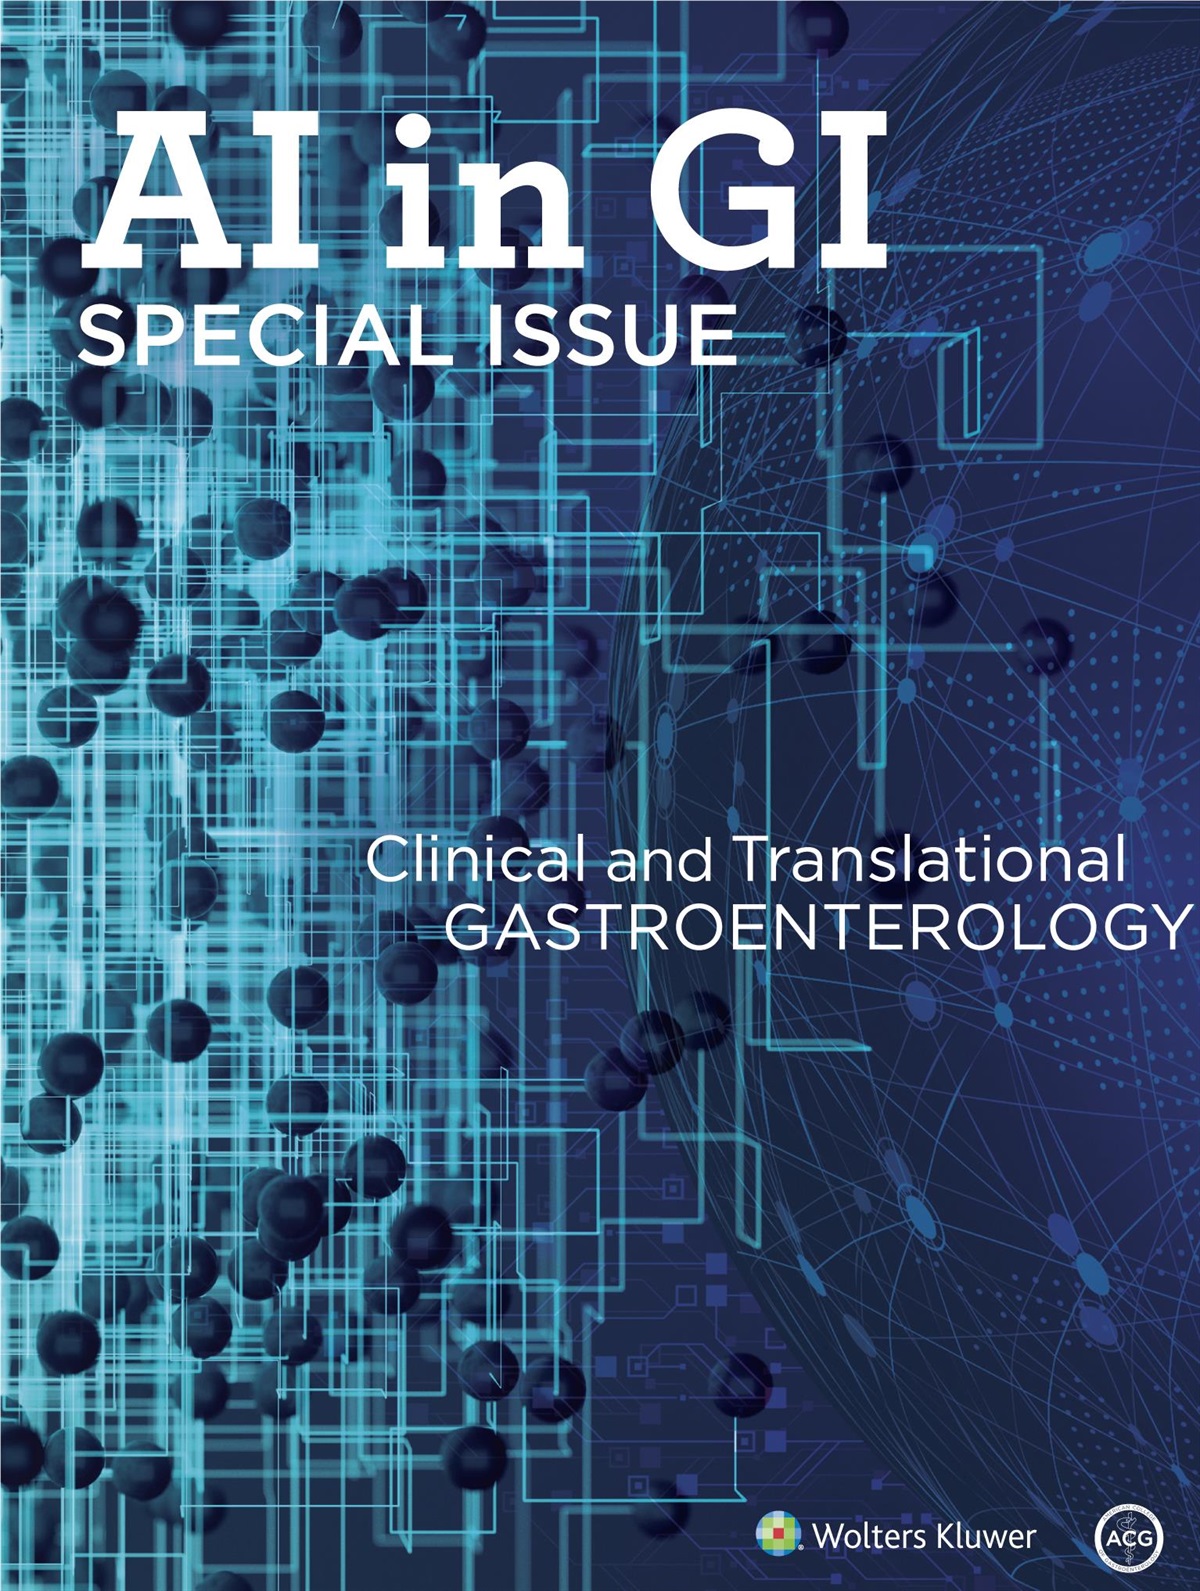 The Use of Artificial Intelligence in Gastroenterology: A Glimpse Into the Present